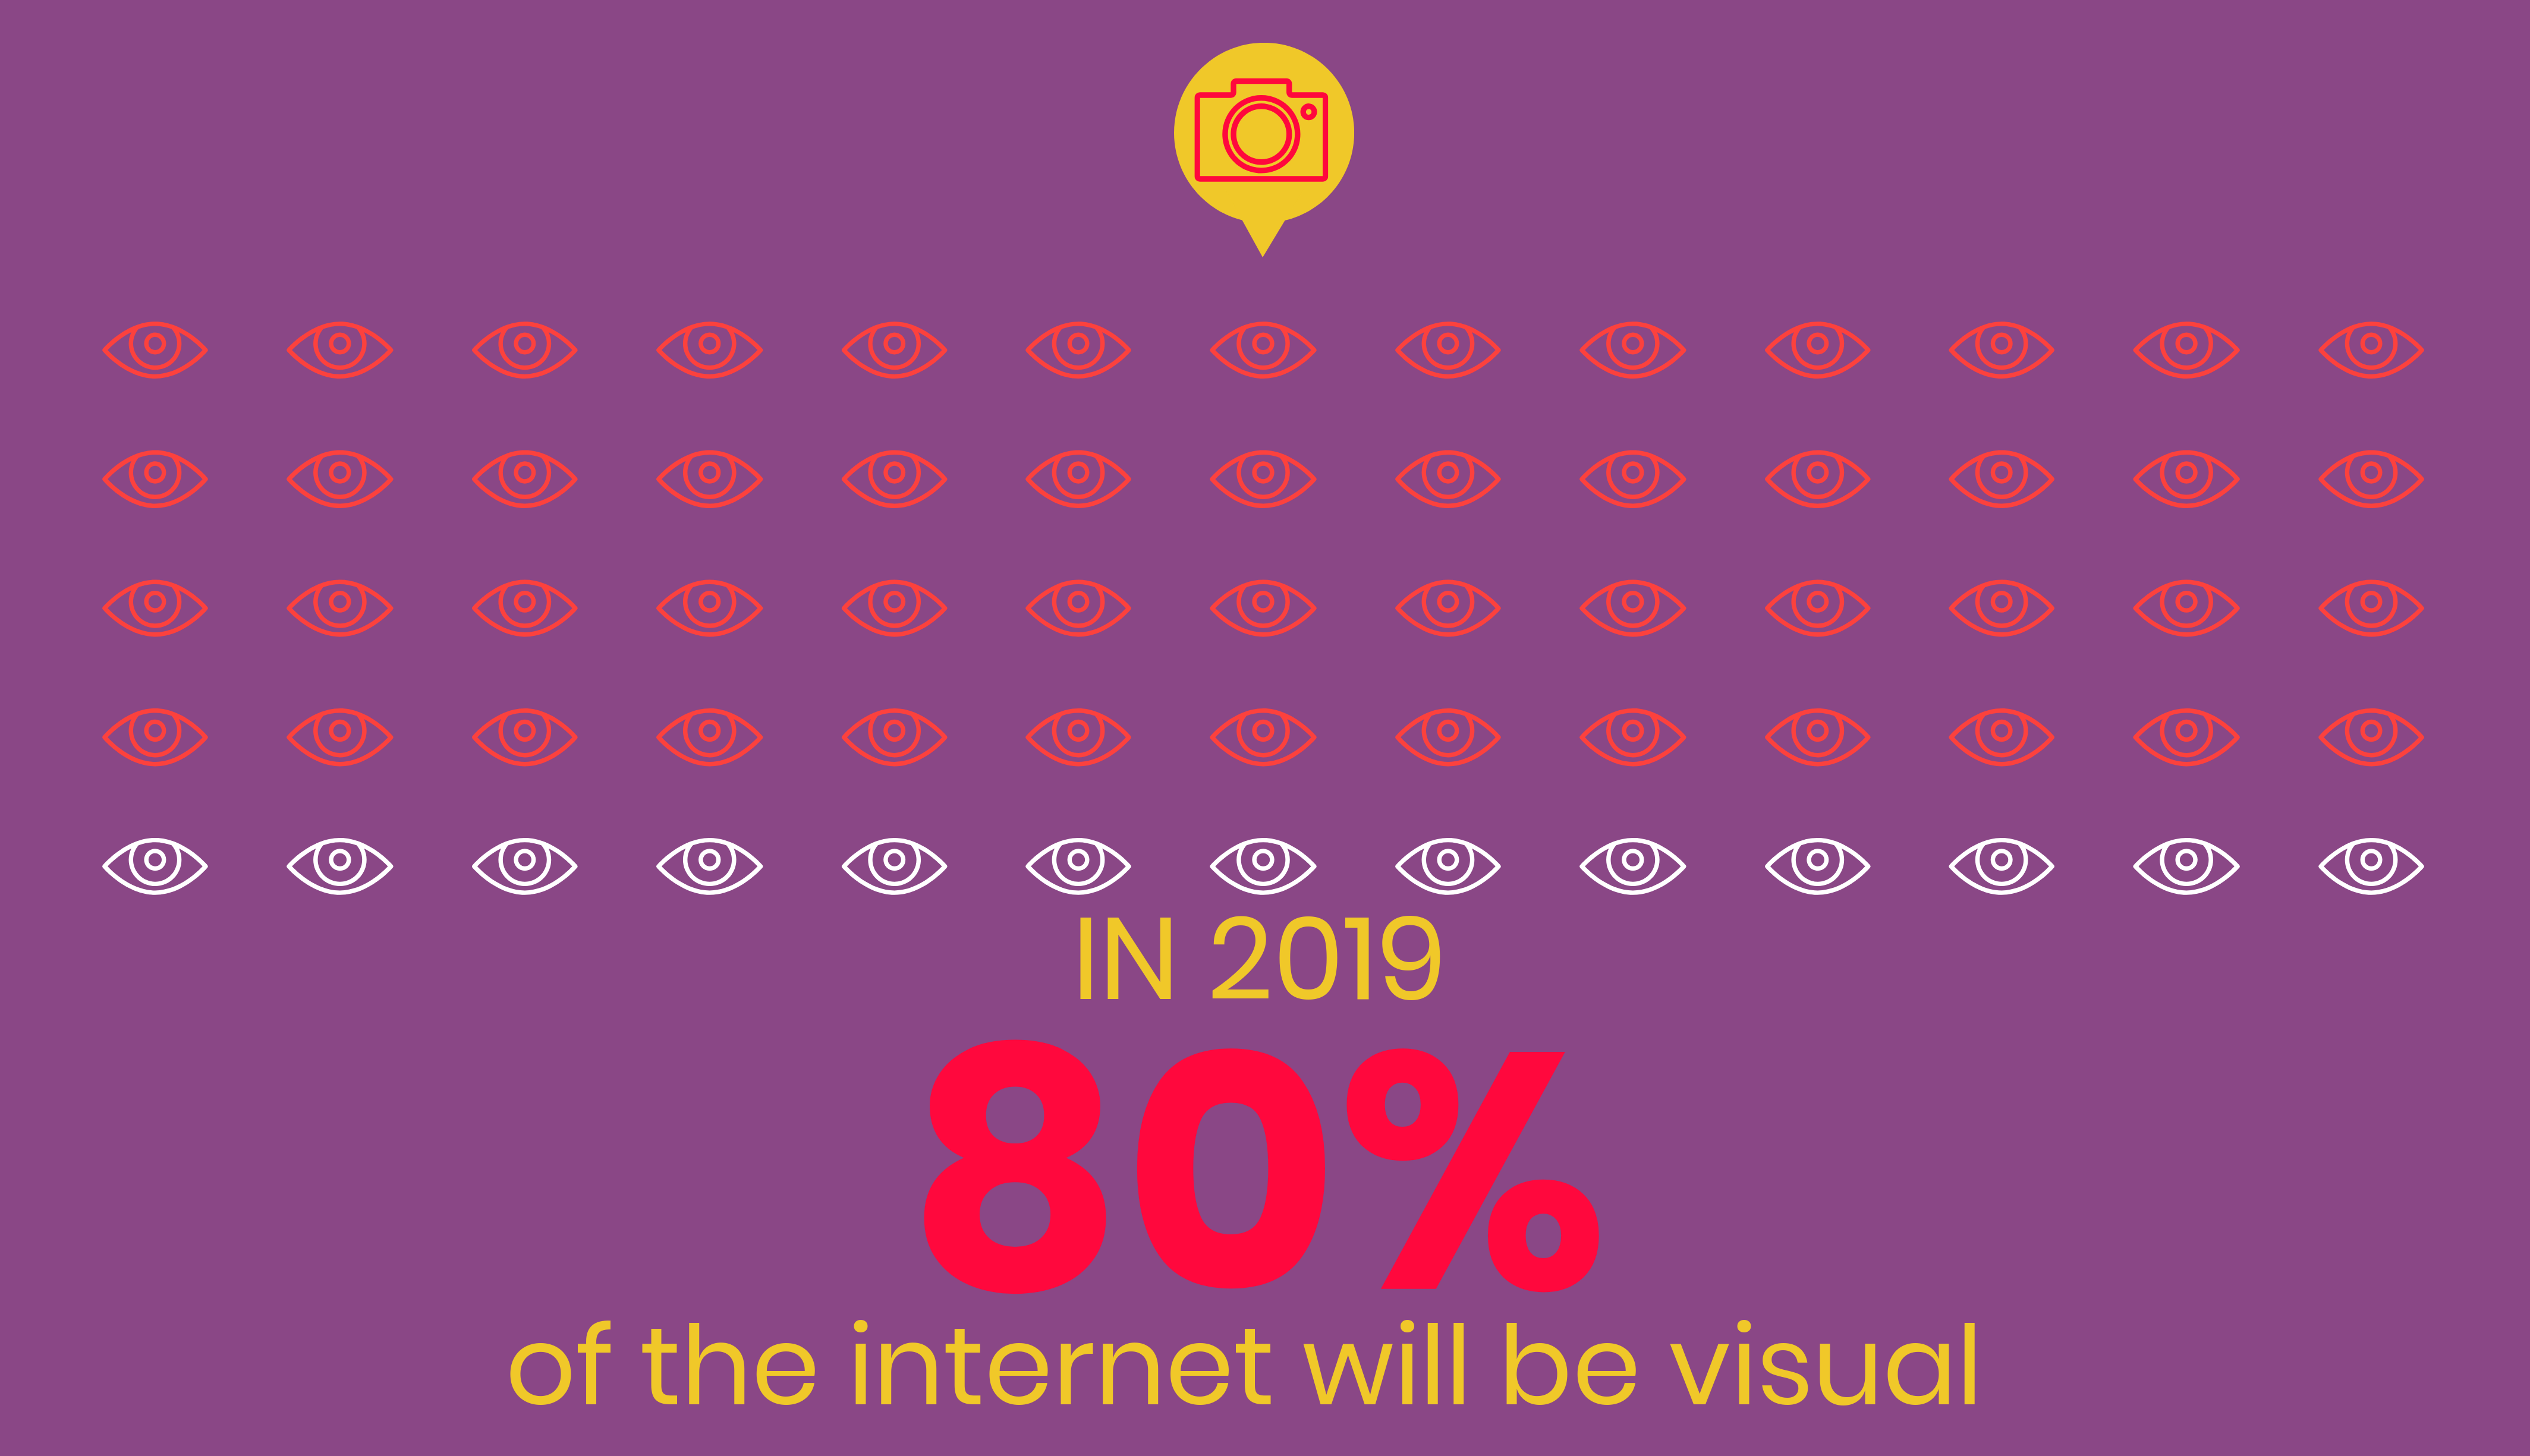 SEO Tips for 2019 - 80%25 Internet Content Visual